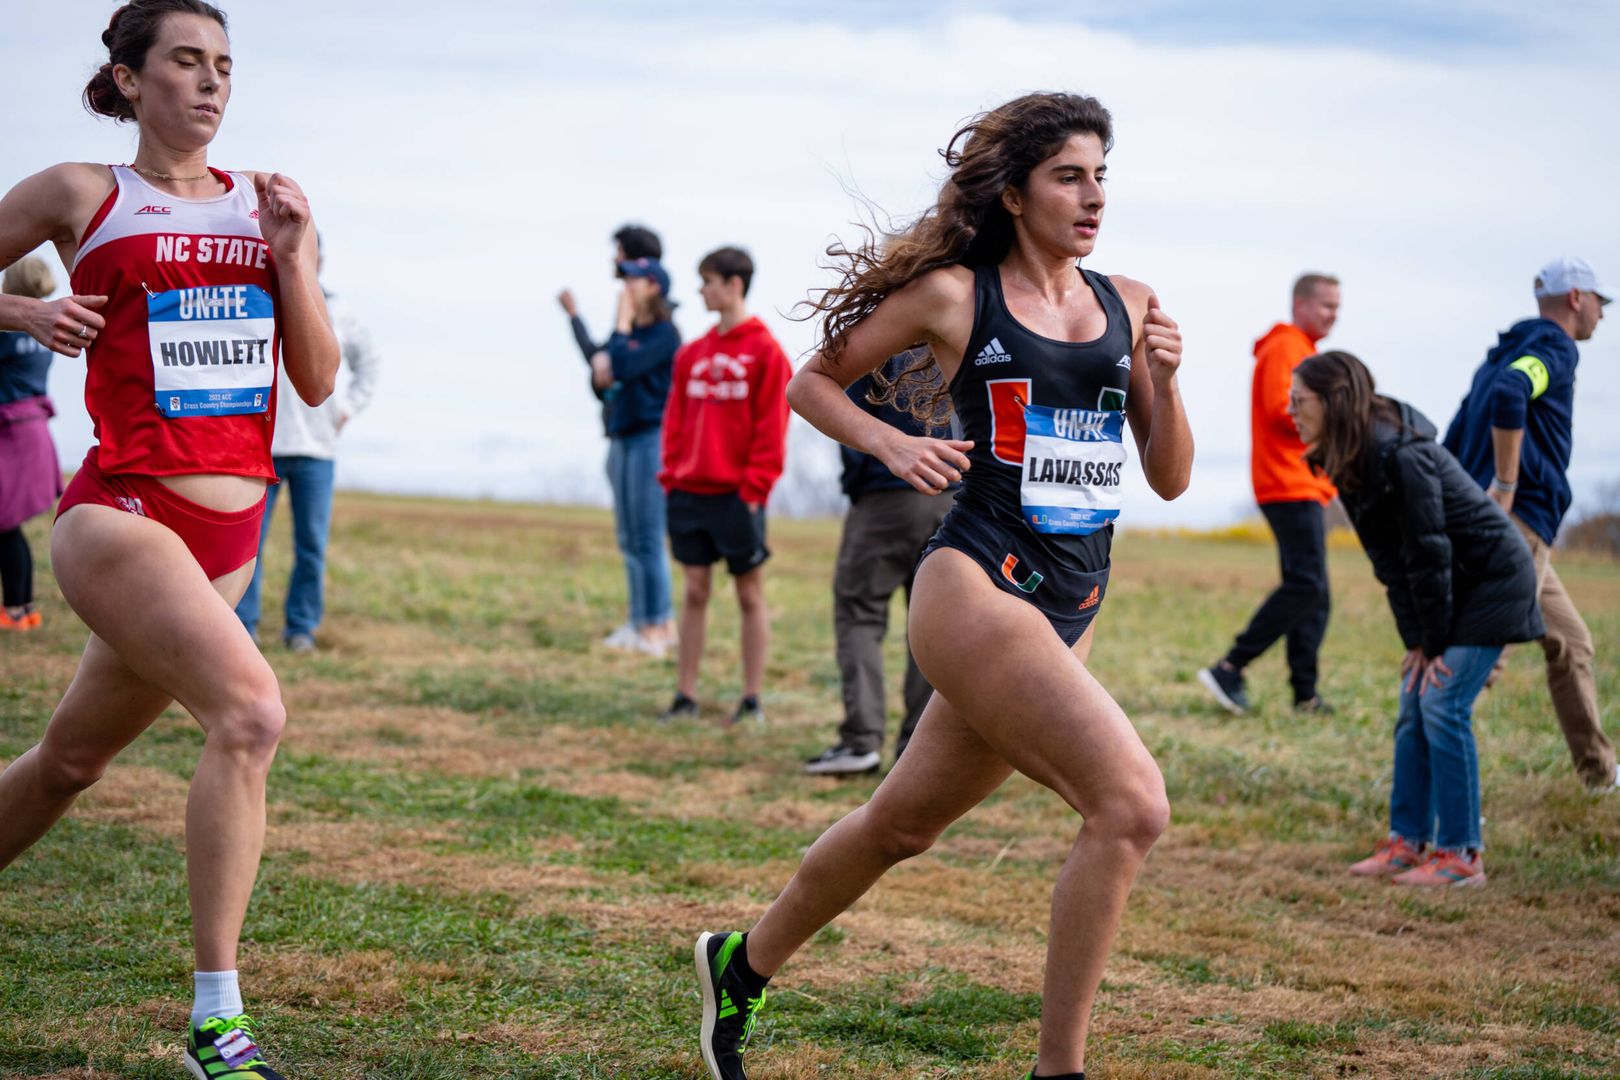 Historic 12th Place Finish at ACC Cross Country Championships